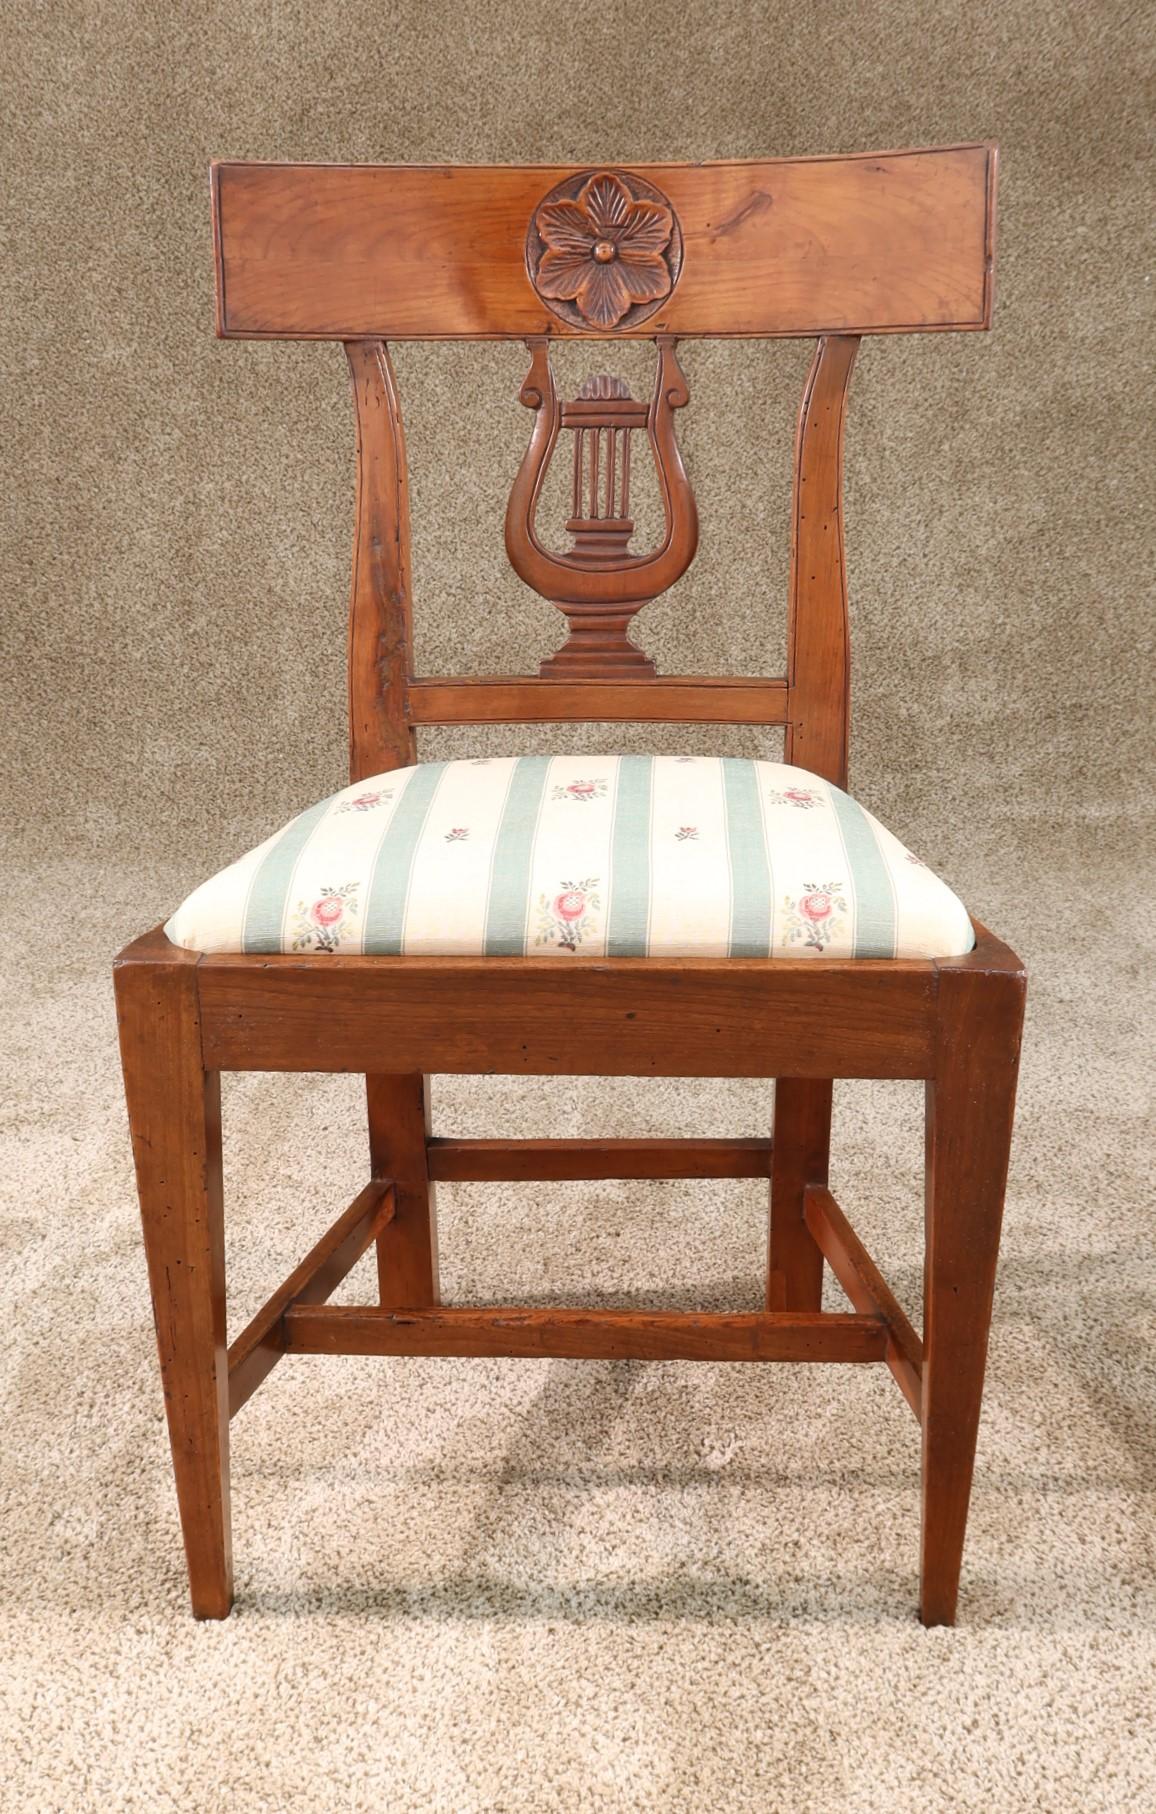 Pair of Small Scale French Fruitwood Side Chairs with Carving, circa 1850 For Sale 5